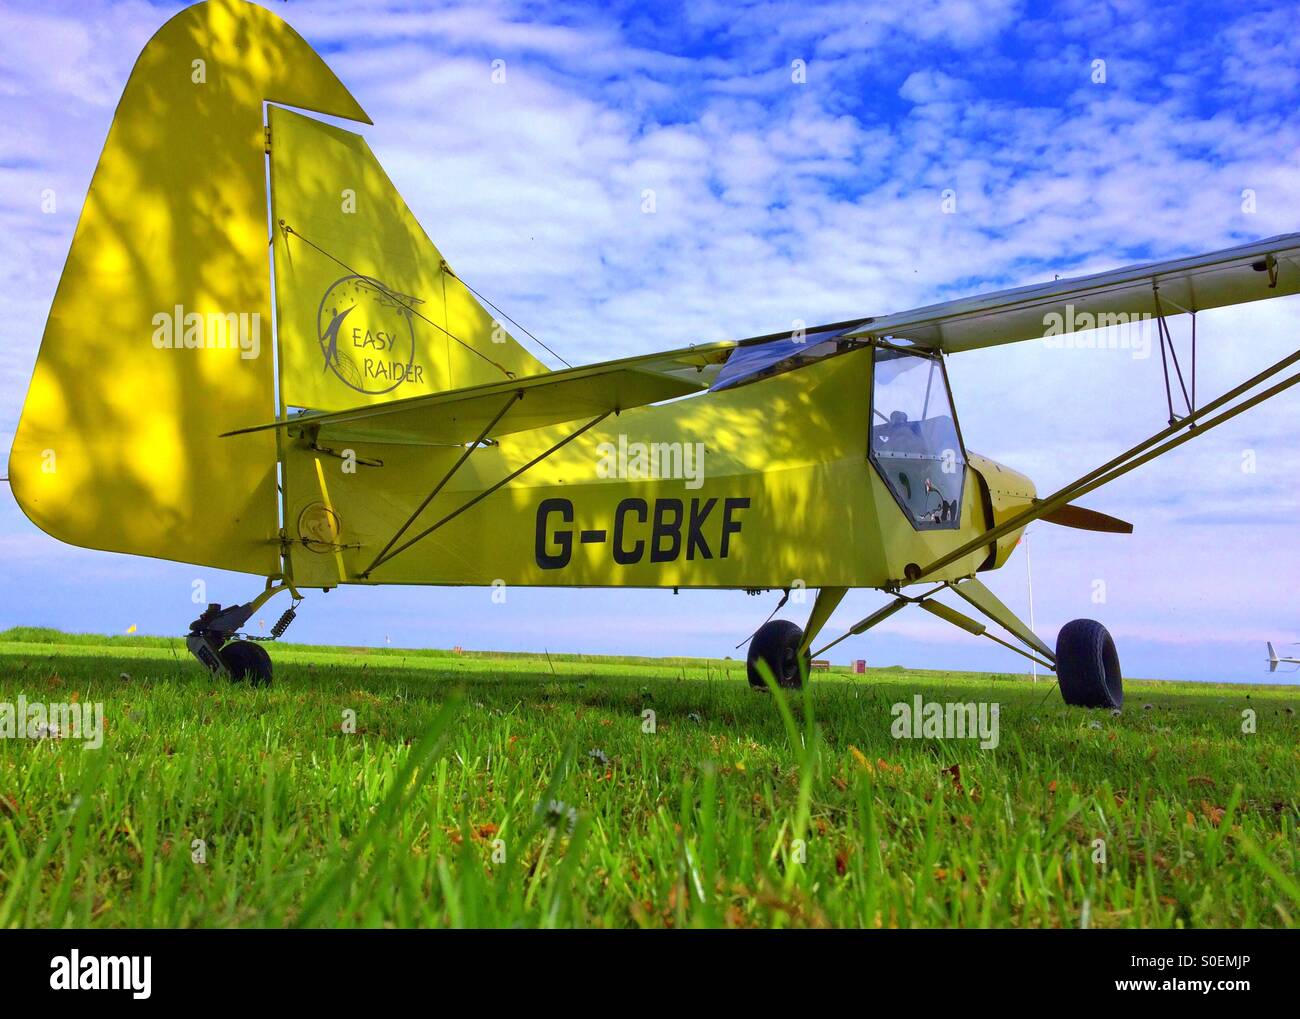 Easy Raider microlight aircraft on the grass under blue sky at North Coates Flying Club North Coates Airfield North Cotes Grimsby Stock Photo